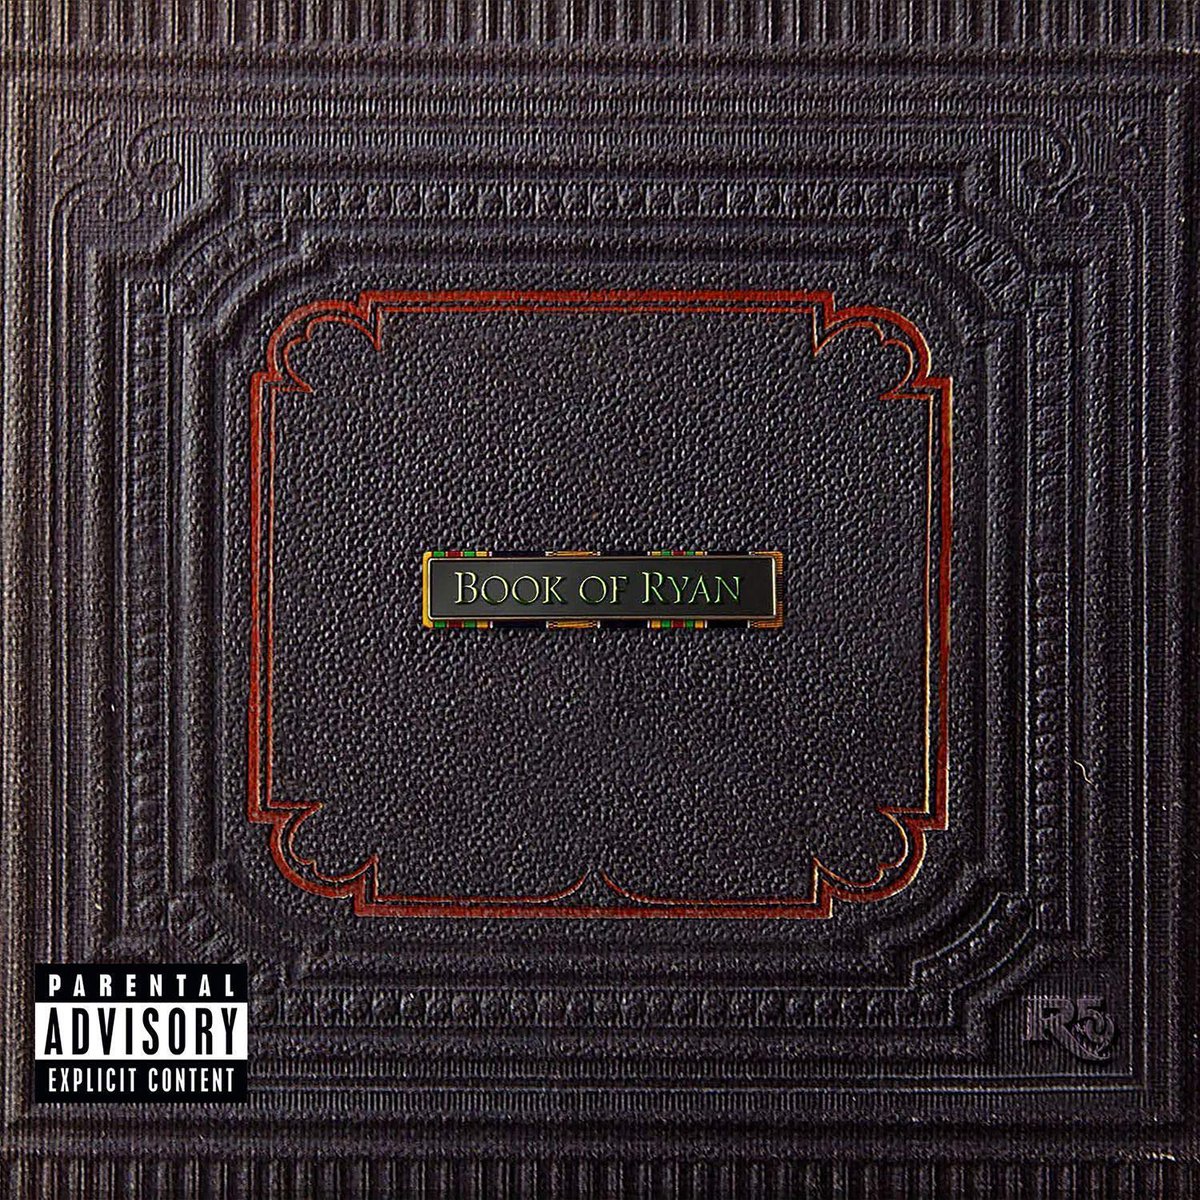 May 4, 2018 @Royceda59 released the Book of Ryan

Some Production Includes @Royceda59 @COOLANDDRE @DJKhalil @Key_Wane @mRpOrTeR7 @illmindPRODUCER and more

Some Features Include @Eminem @WS_Boogie @JColeNC @Therealkiss @PUSHA_T @robertglasper @TPAIN and more